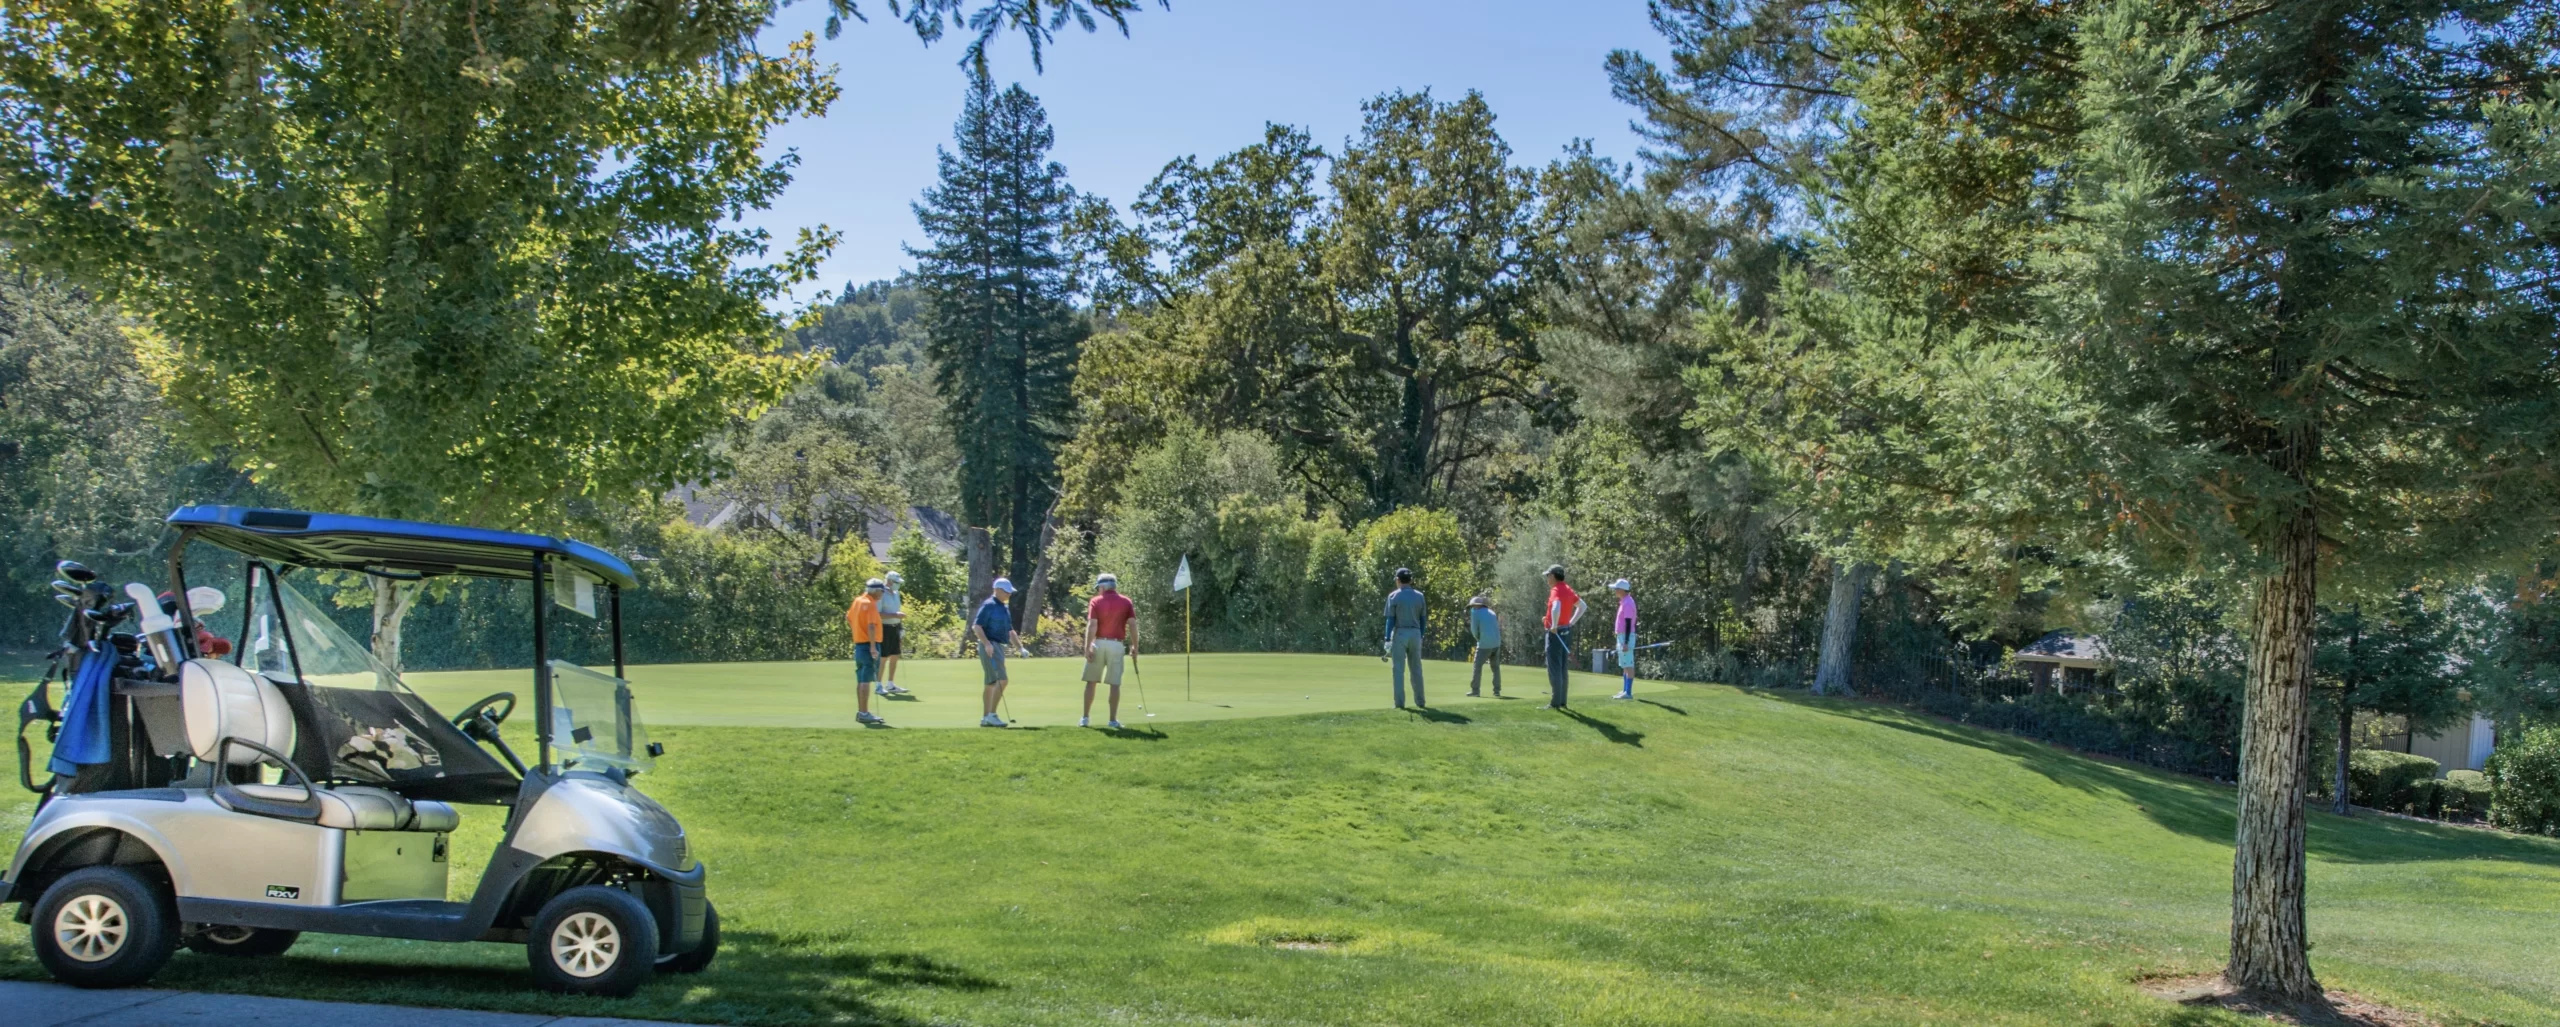 Golfers standing around a hole on the golf course.